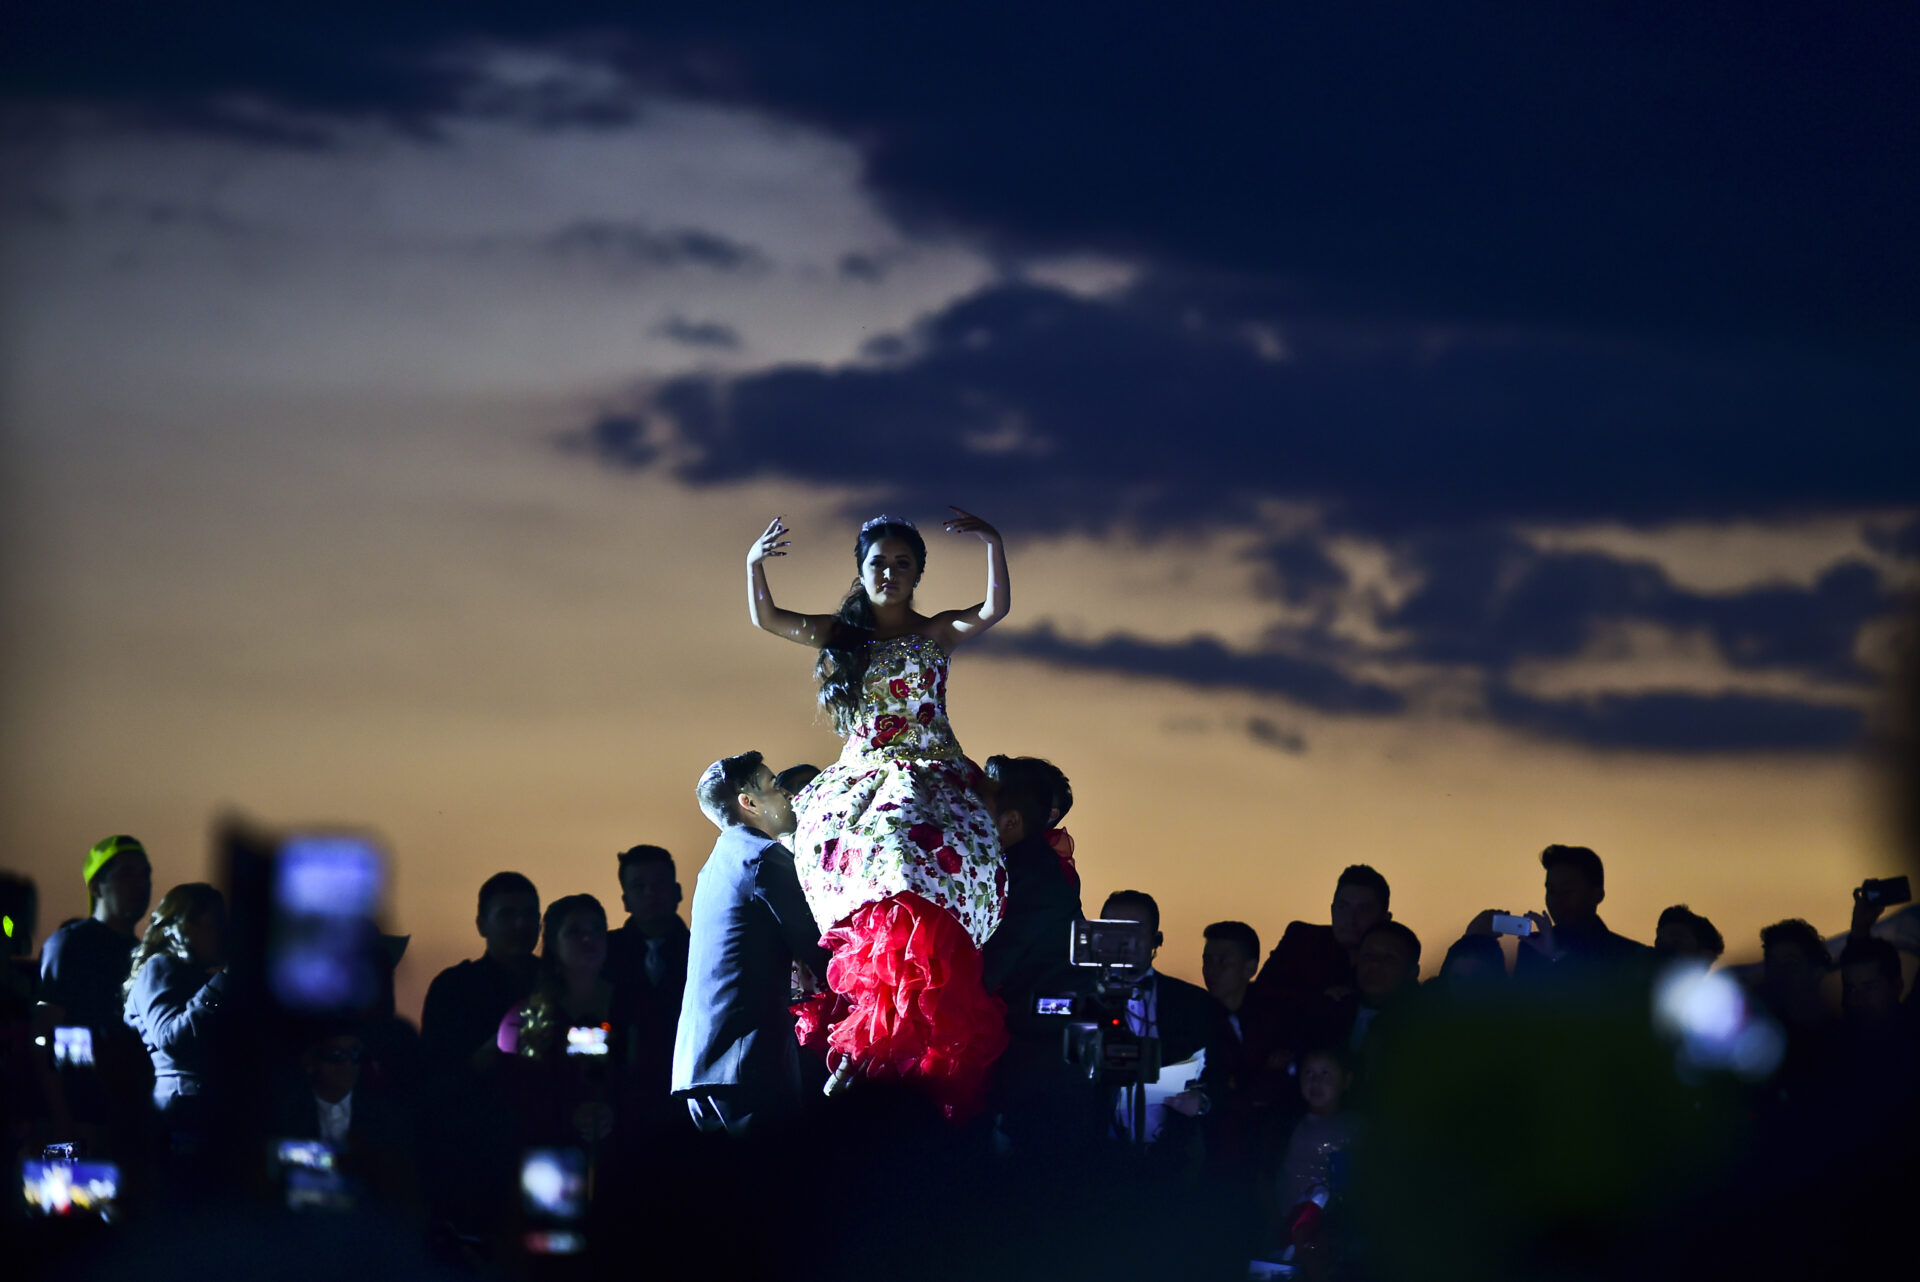 Rubi Ibarra (C)dances during her 15th birthday celebrations in Villa Guadalupe, San Luis Potosi State, on December 26, 2016.  Rubi, a small-town Mexican teen, welcomed thousands of guests for her 15th birthday party  after her parents' video invitation to the milestone event went viral online.  / AFP PHOTO / RONALDO SCHEMIDT